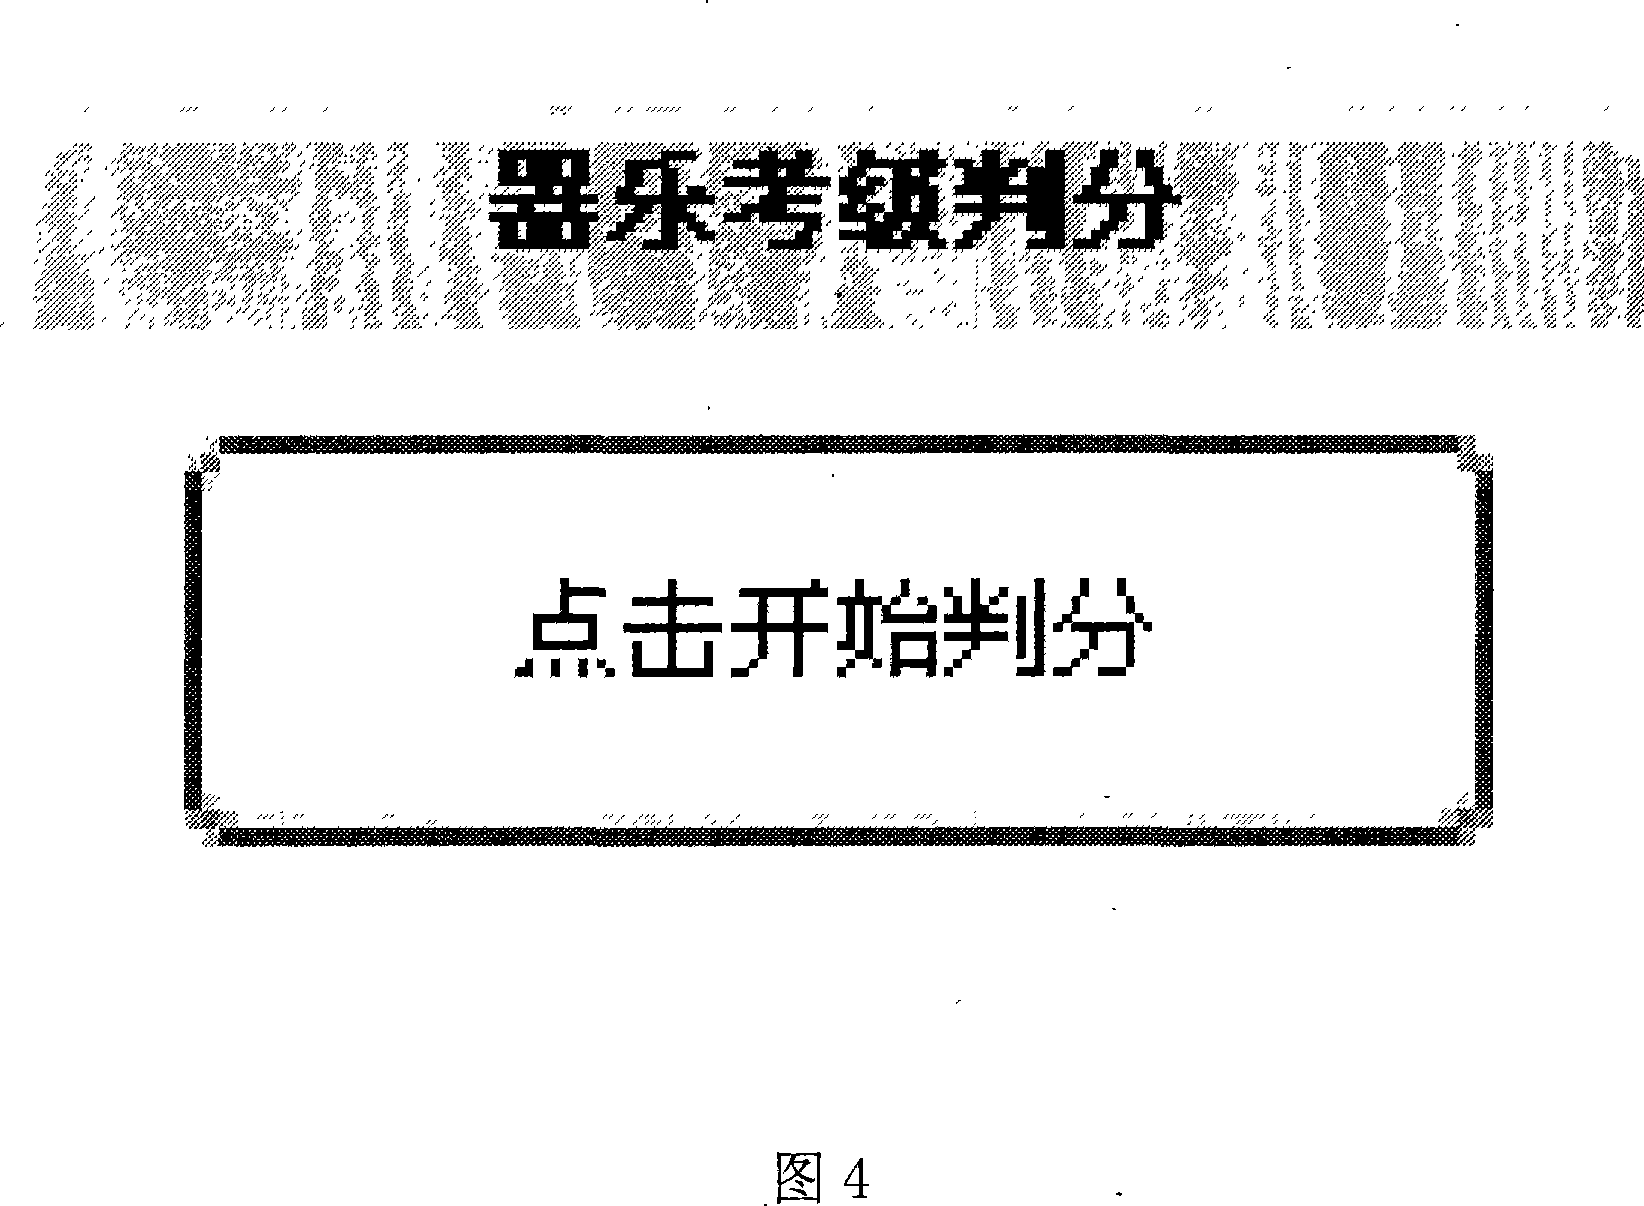 Network video test system for remote test implementing method